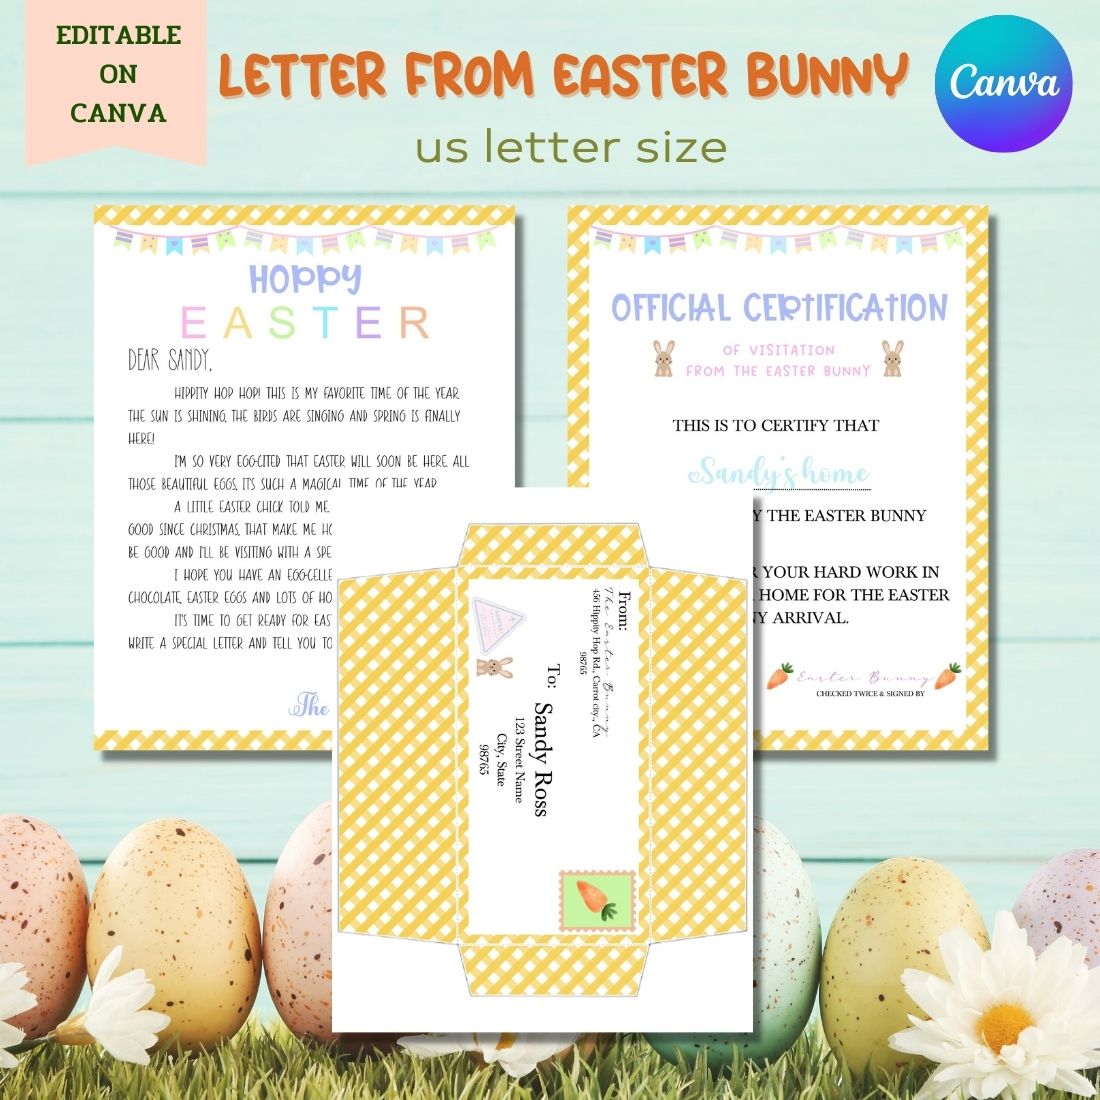 EDITABLE Letter from Easter Bunny cover image.